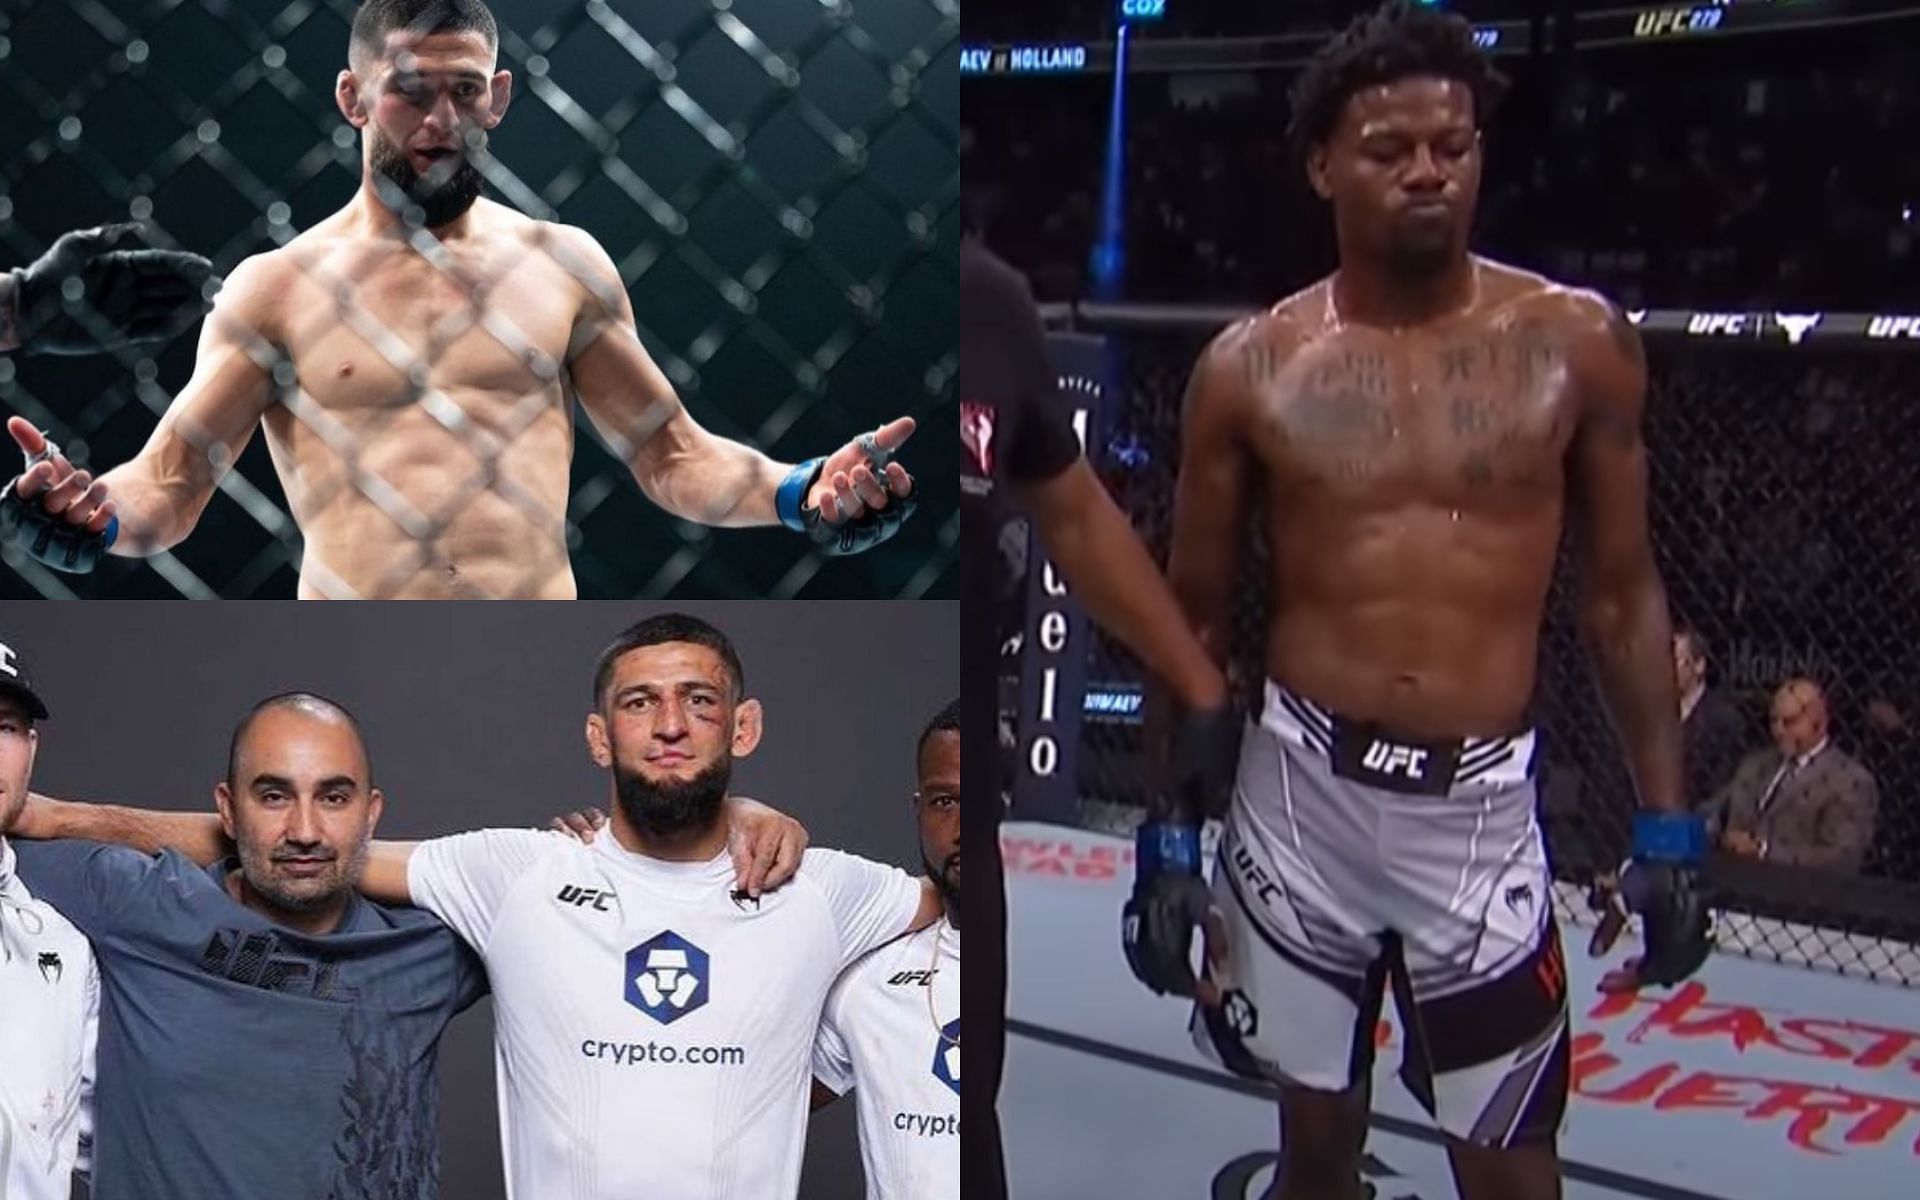 Khamzat Chimaev, (Top Left), Michael and Chimaev (Bottom Left), and Kevin Holland (Right) [Image courtesy: @andreasthegeneral Instagram and UFC YouTube channel]